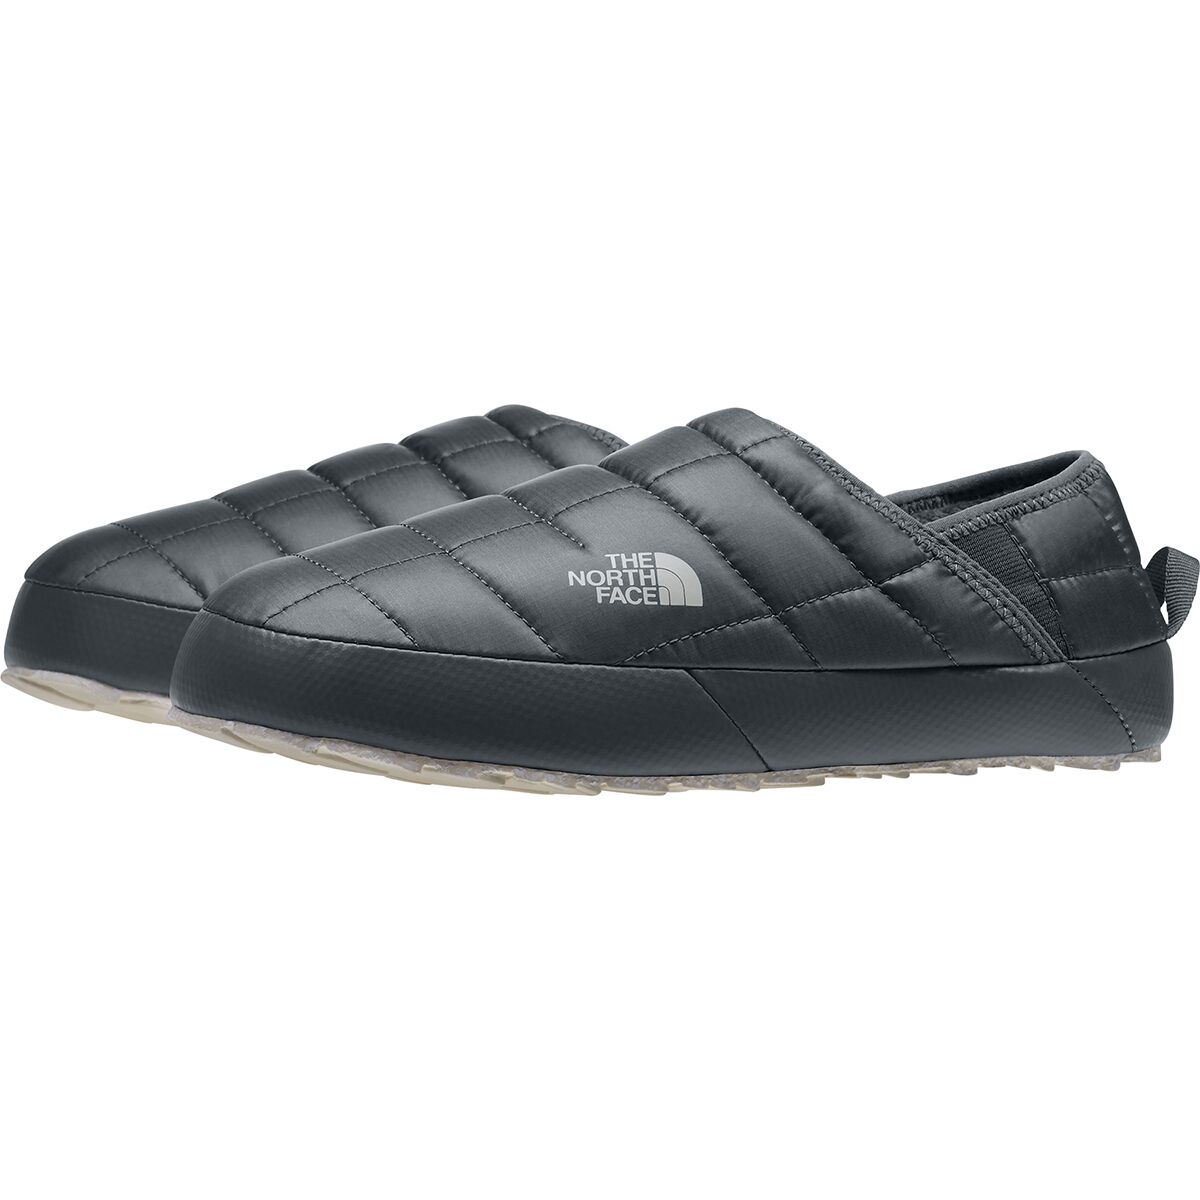 The North Face Thermoball Traction Mule V Shoe - Women's - Footwear